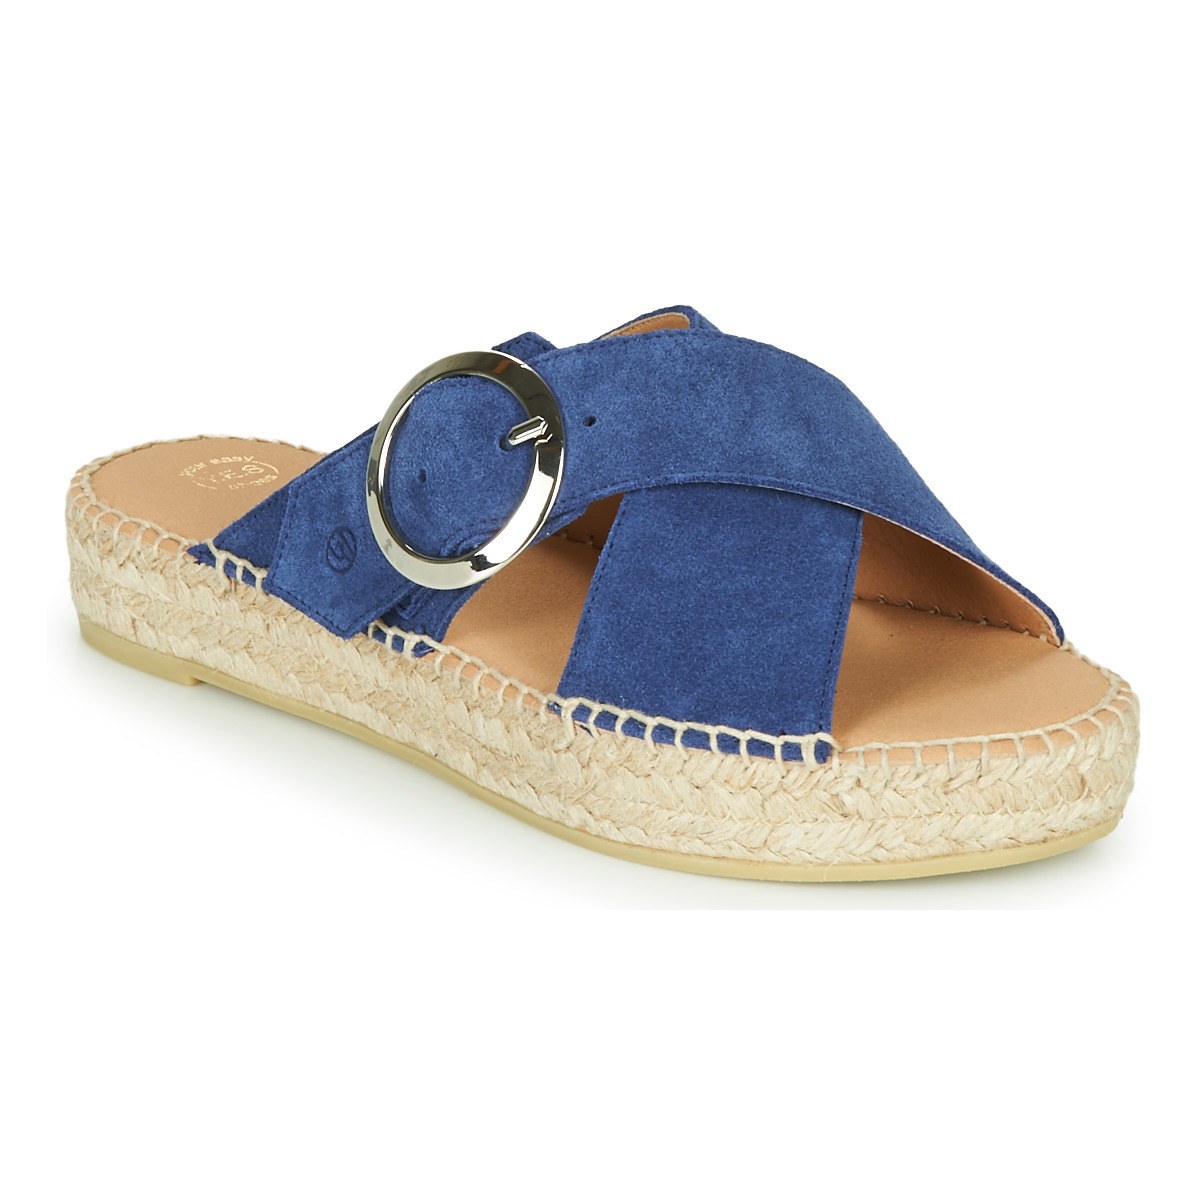 Women's Blue Slippers at Spartoo GOOFASH